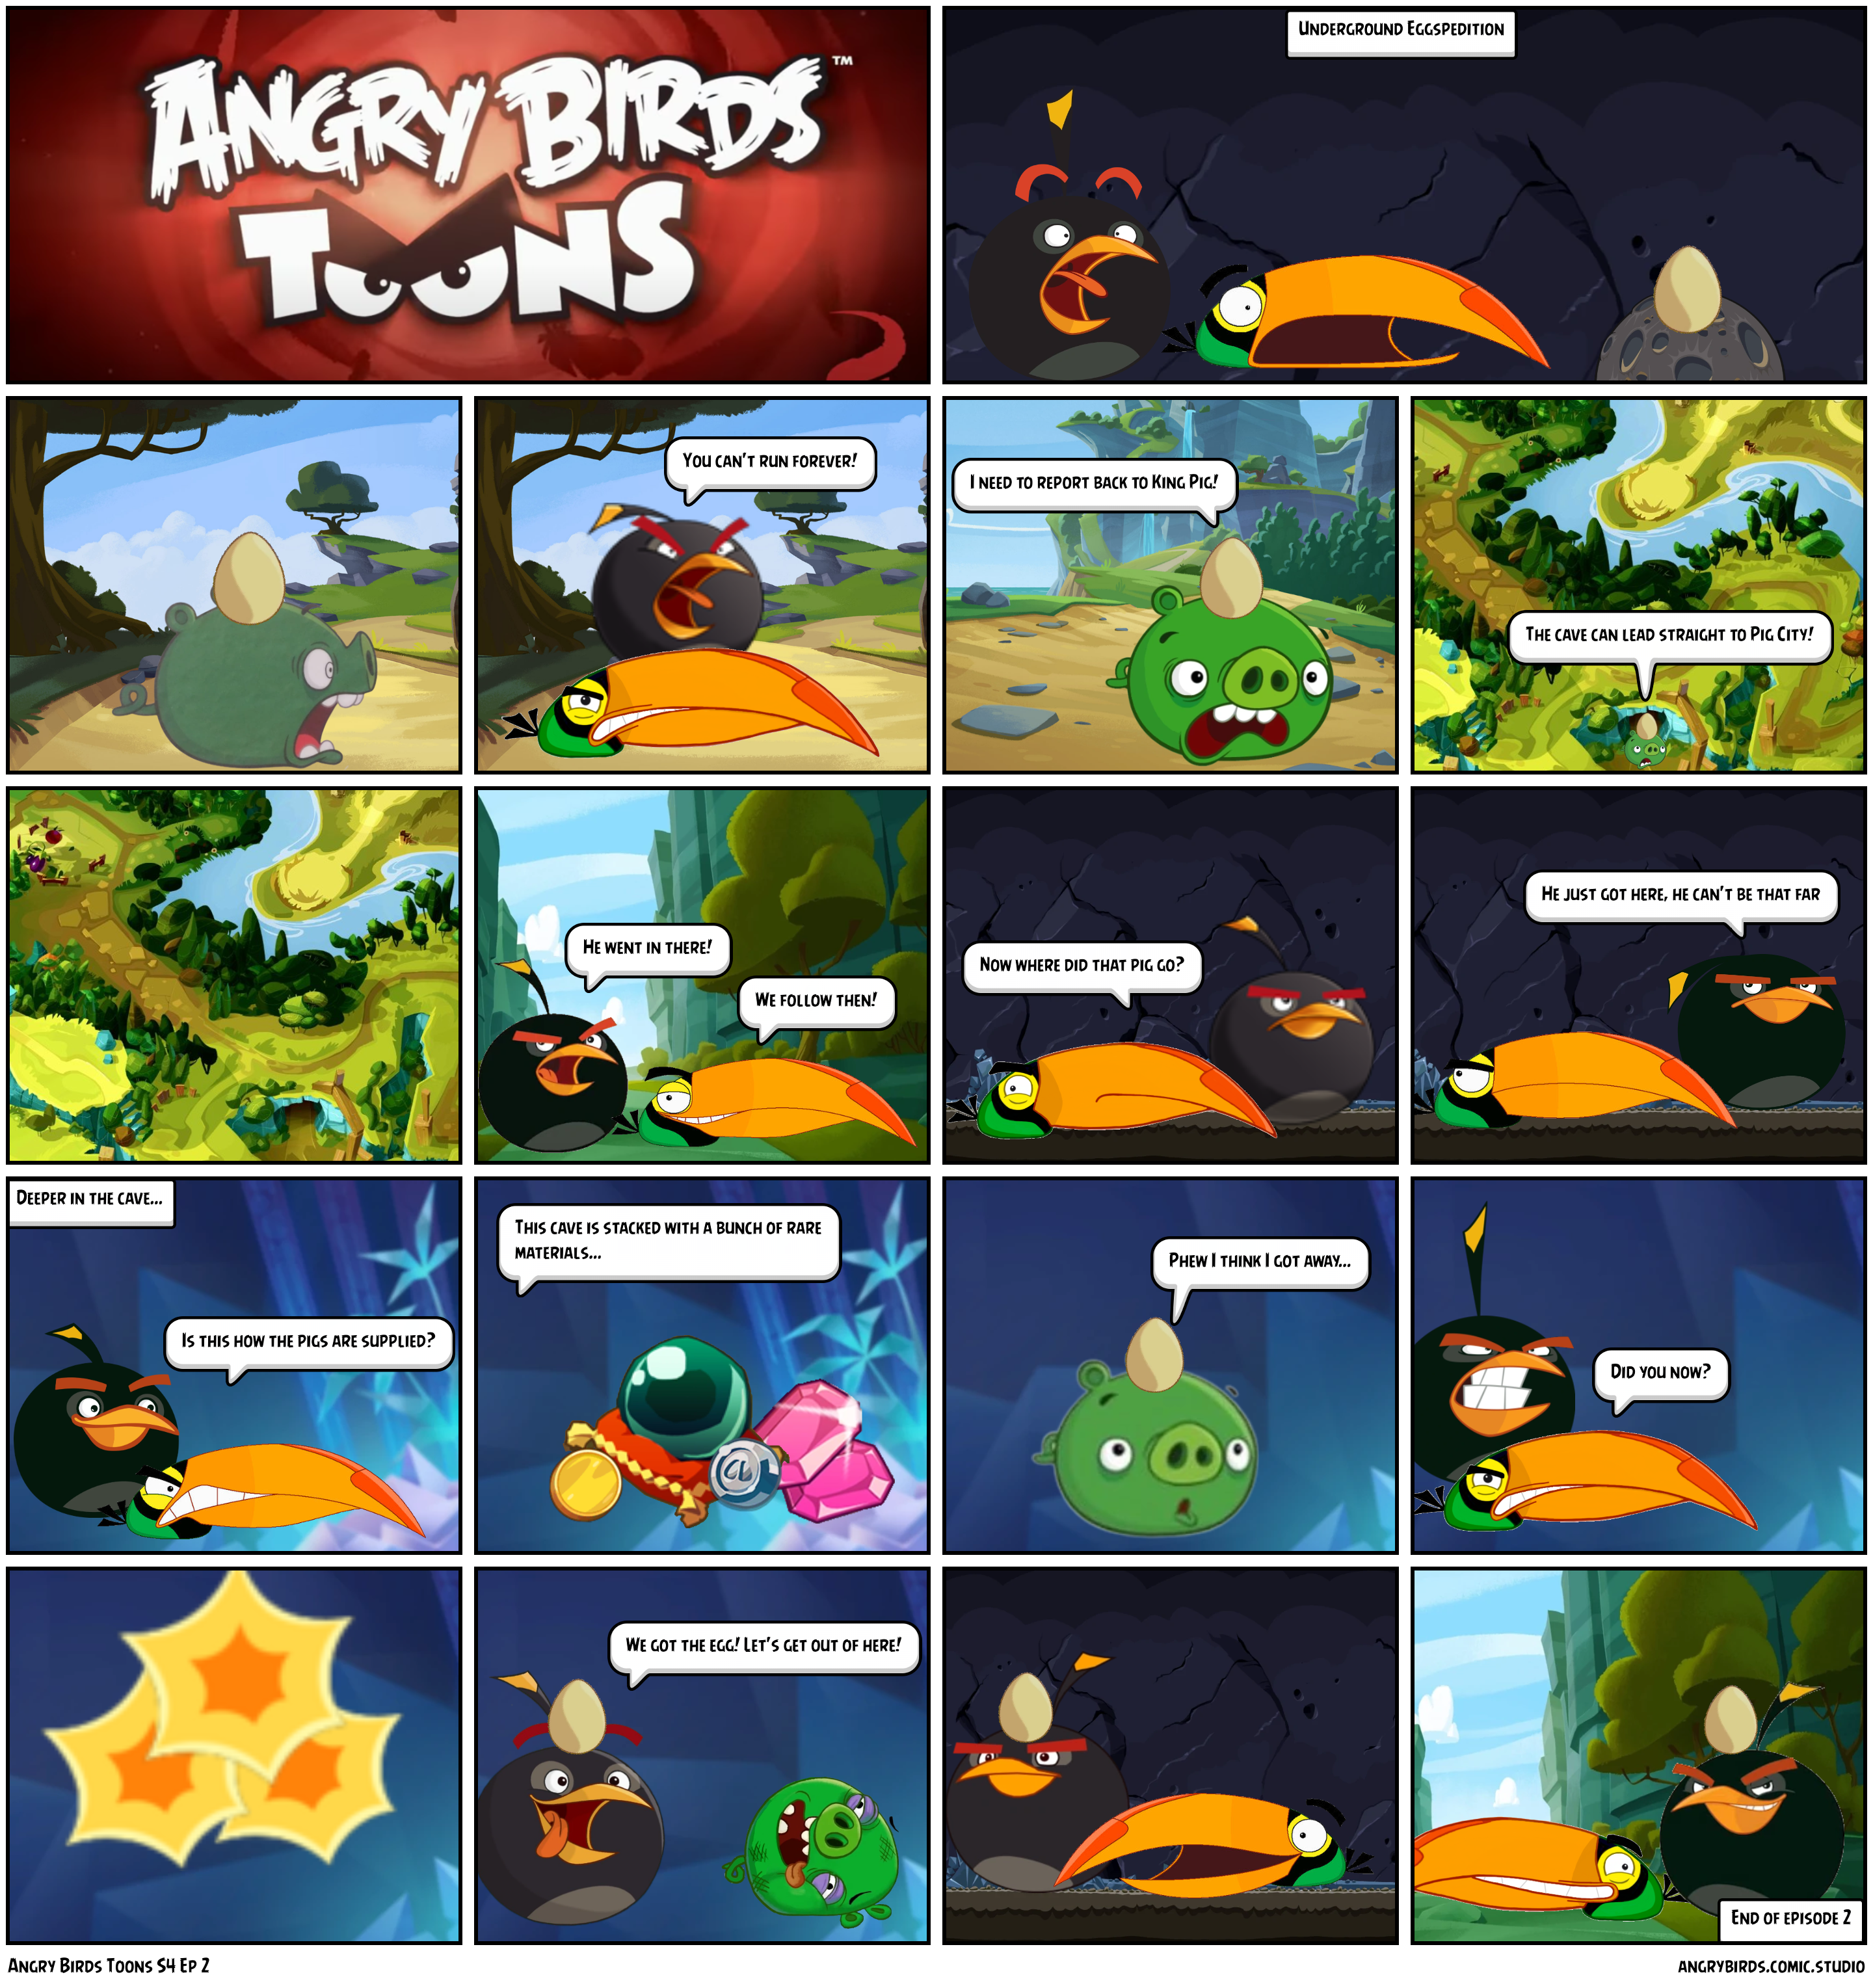 Angry Birds Toons S4 Ep 2